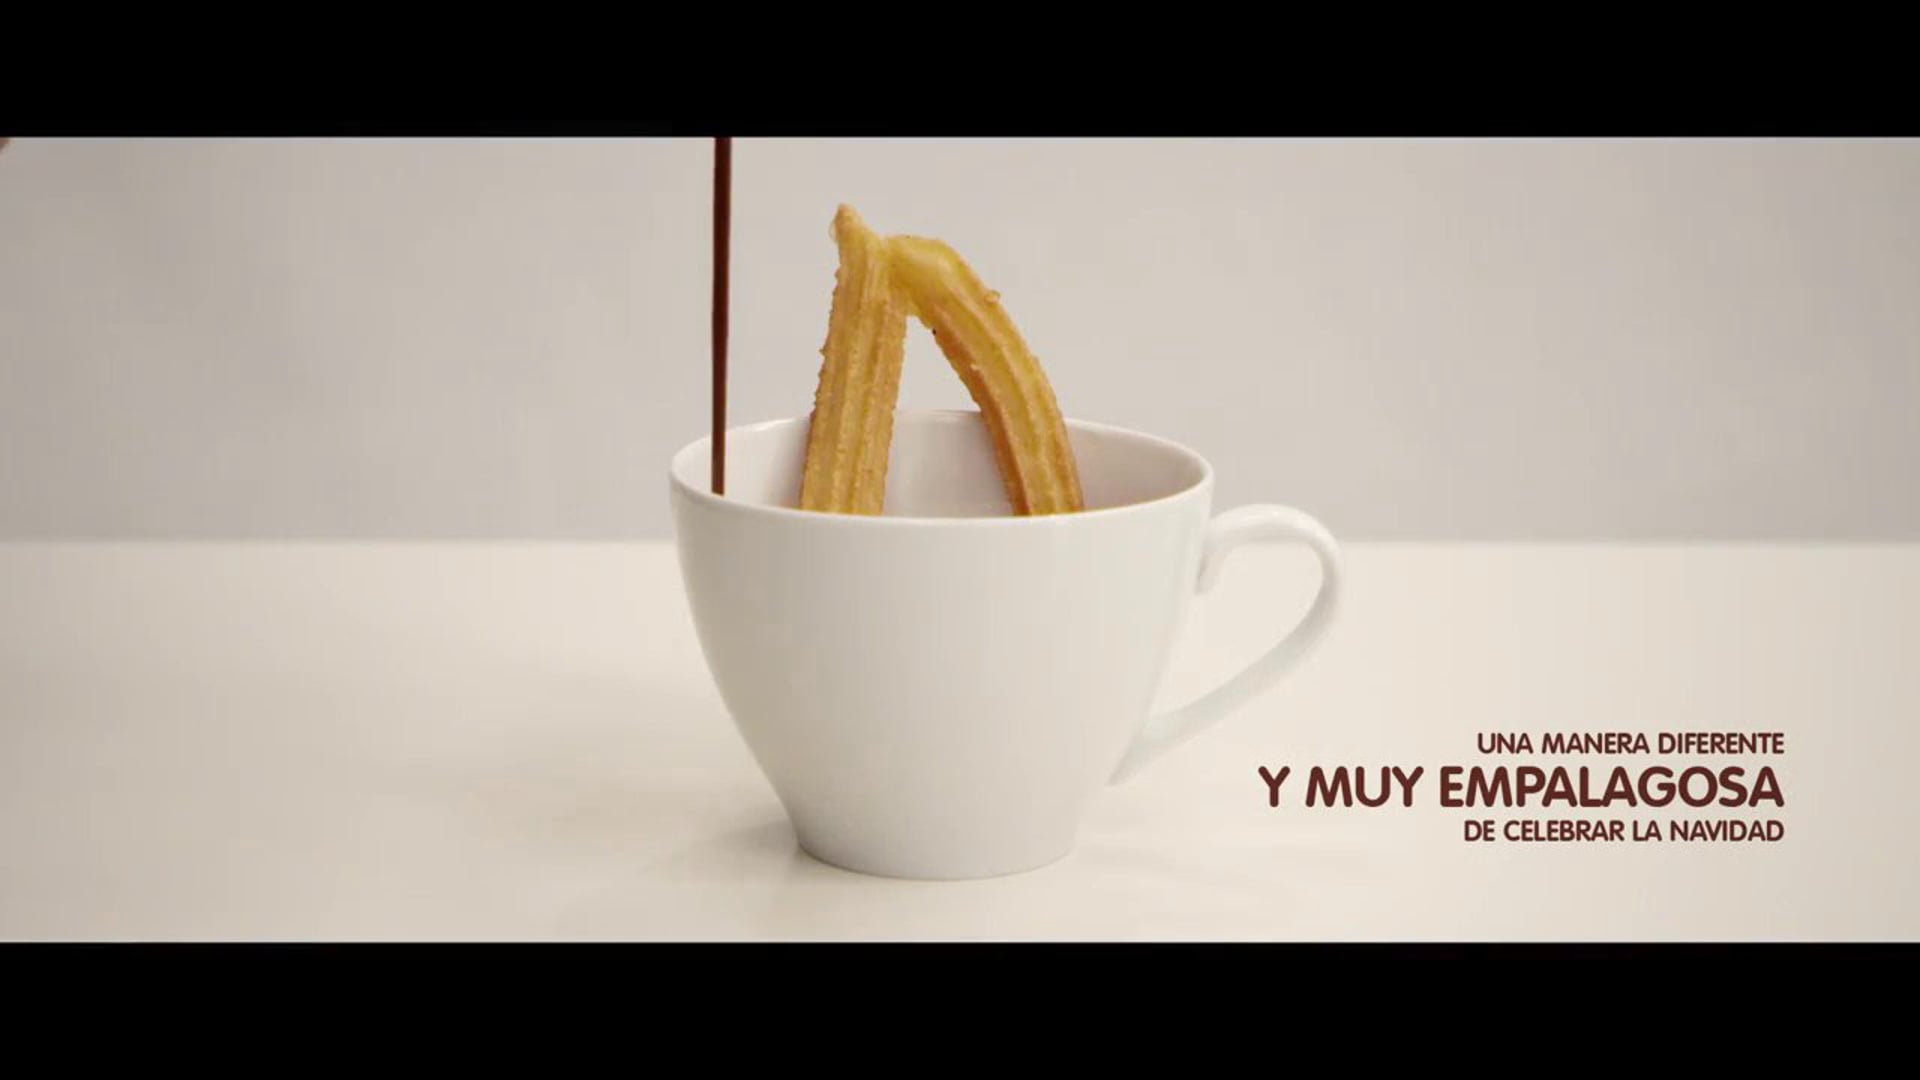 "Churros with chocolate" for Ontwice